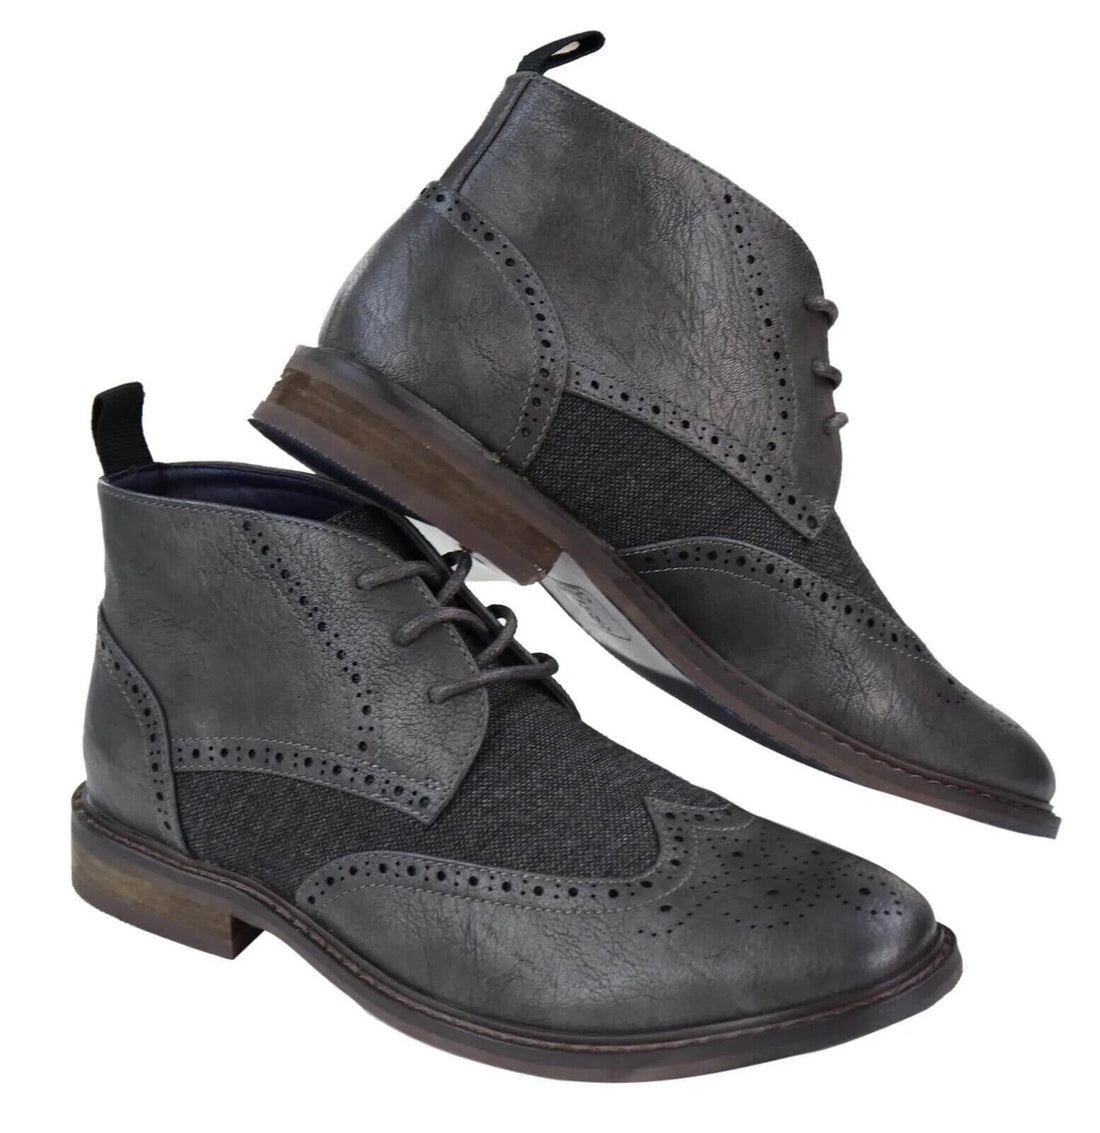 Mens Classic Tweed Oxford Brogue Ankle Boots in Grey Leather - Upperclass Fashions 